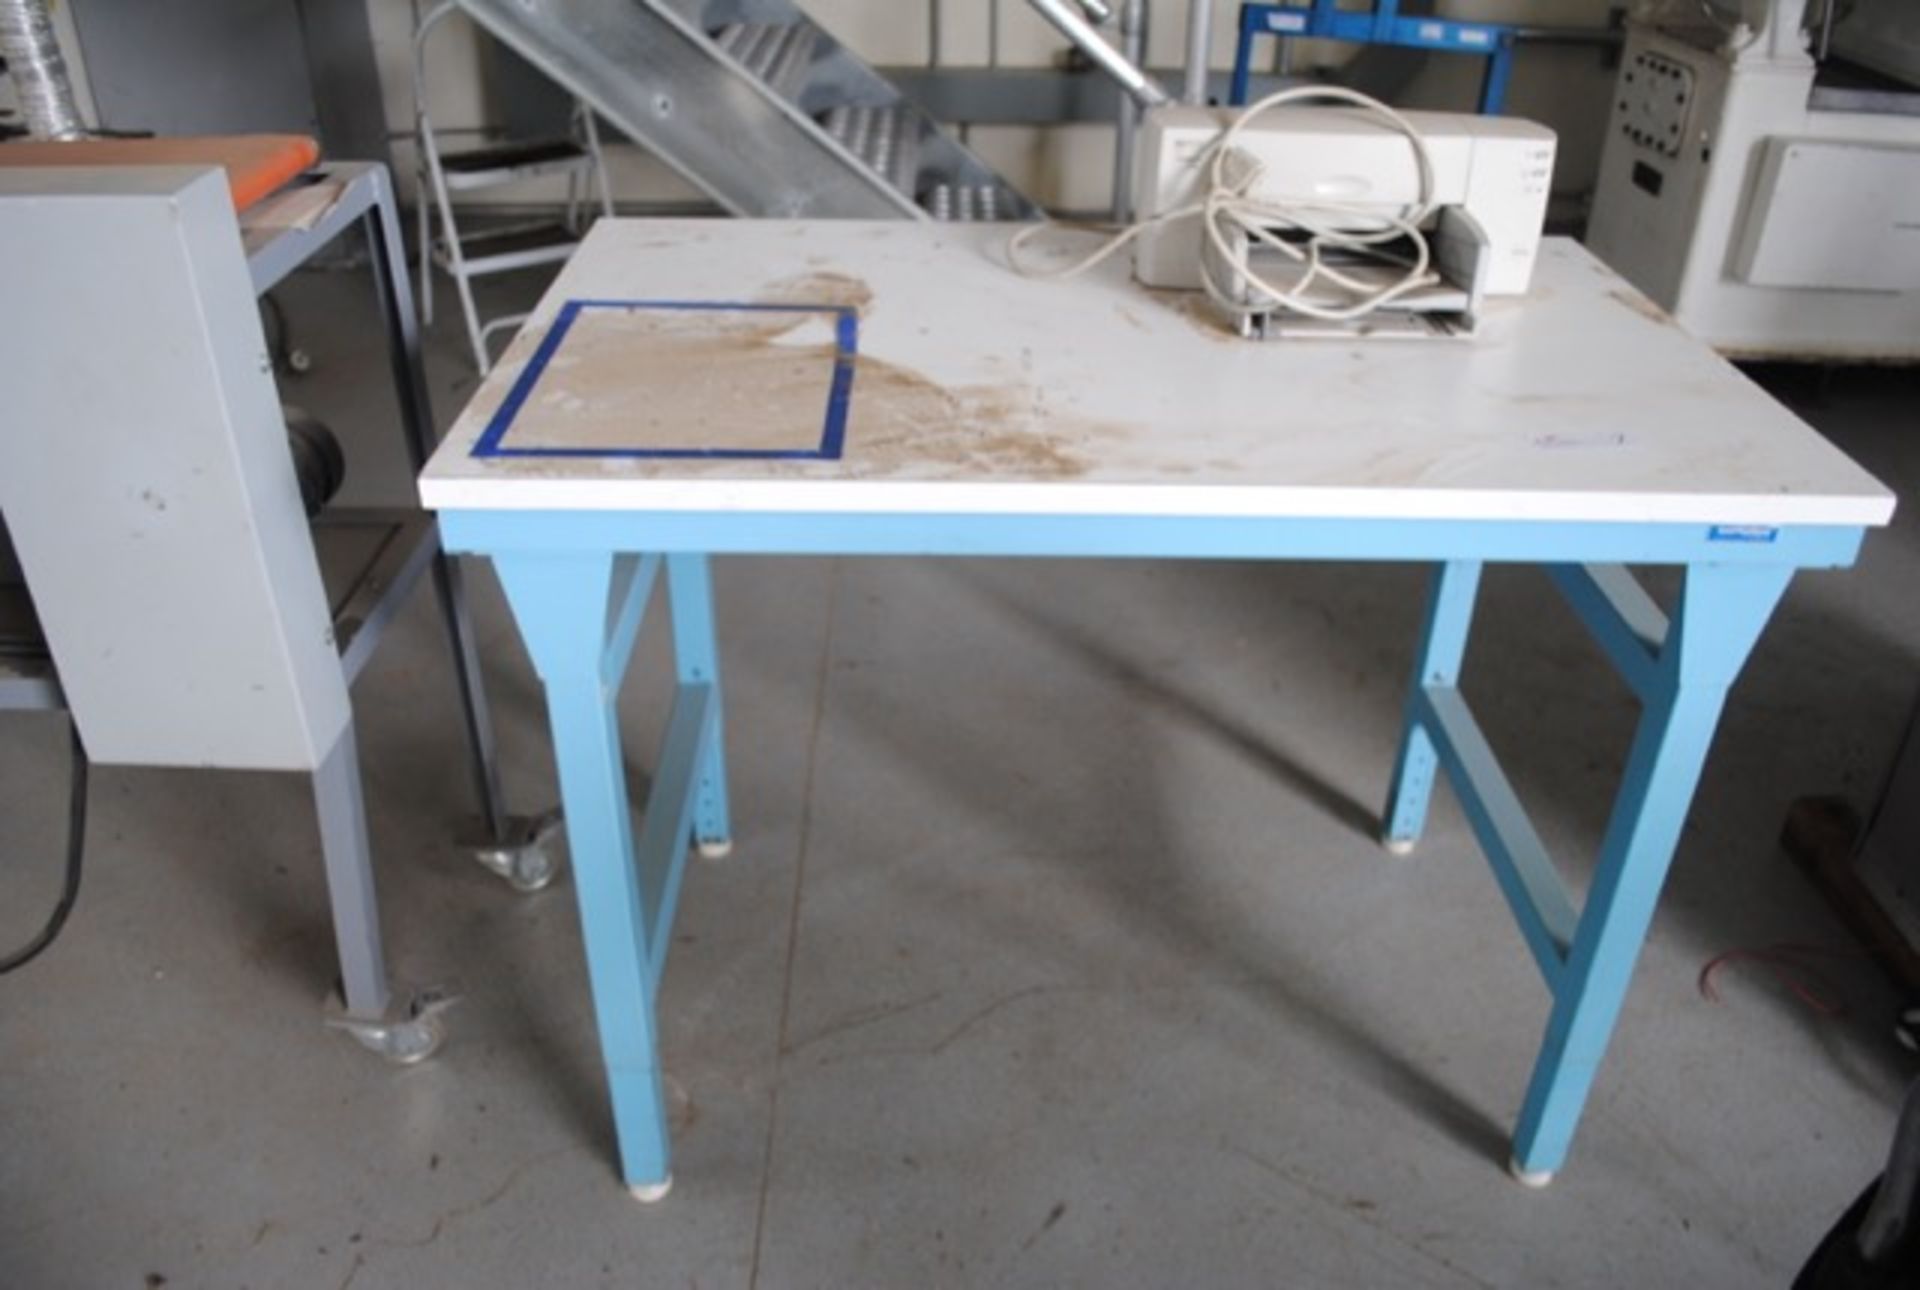 30" x 48" work table with printer